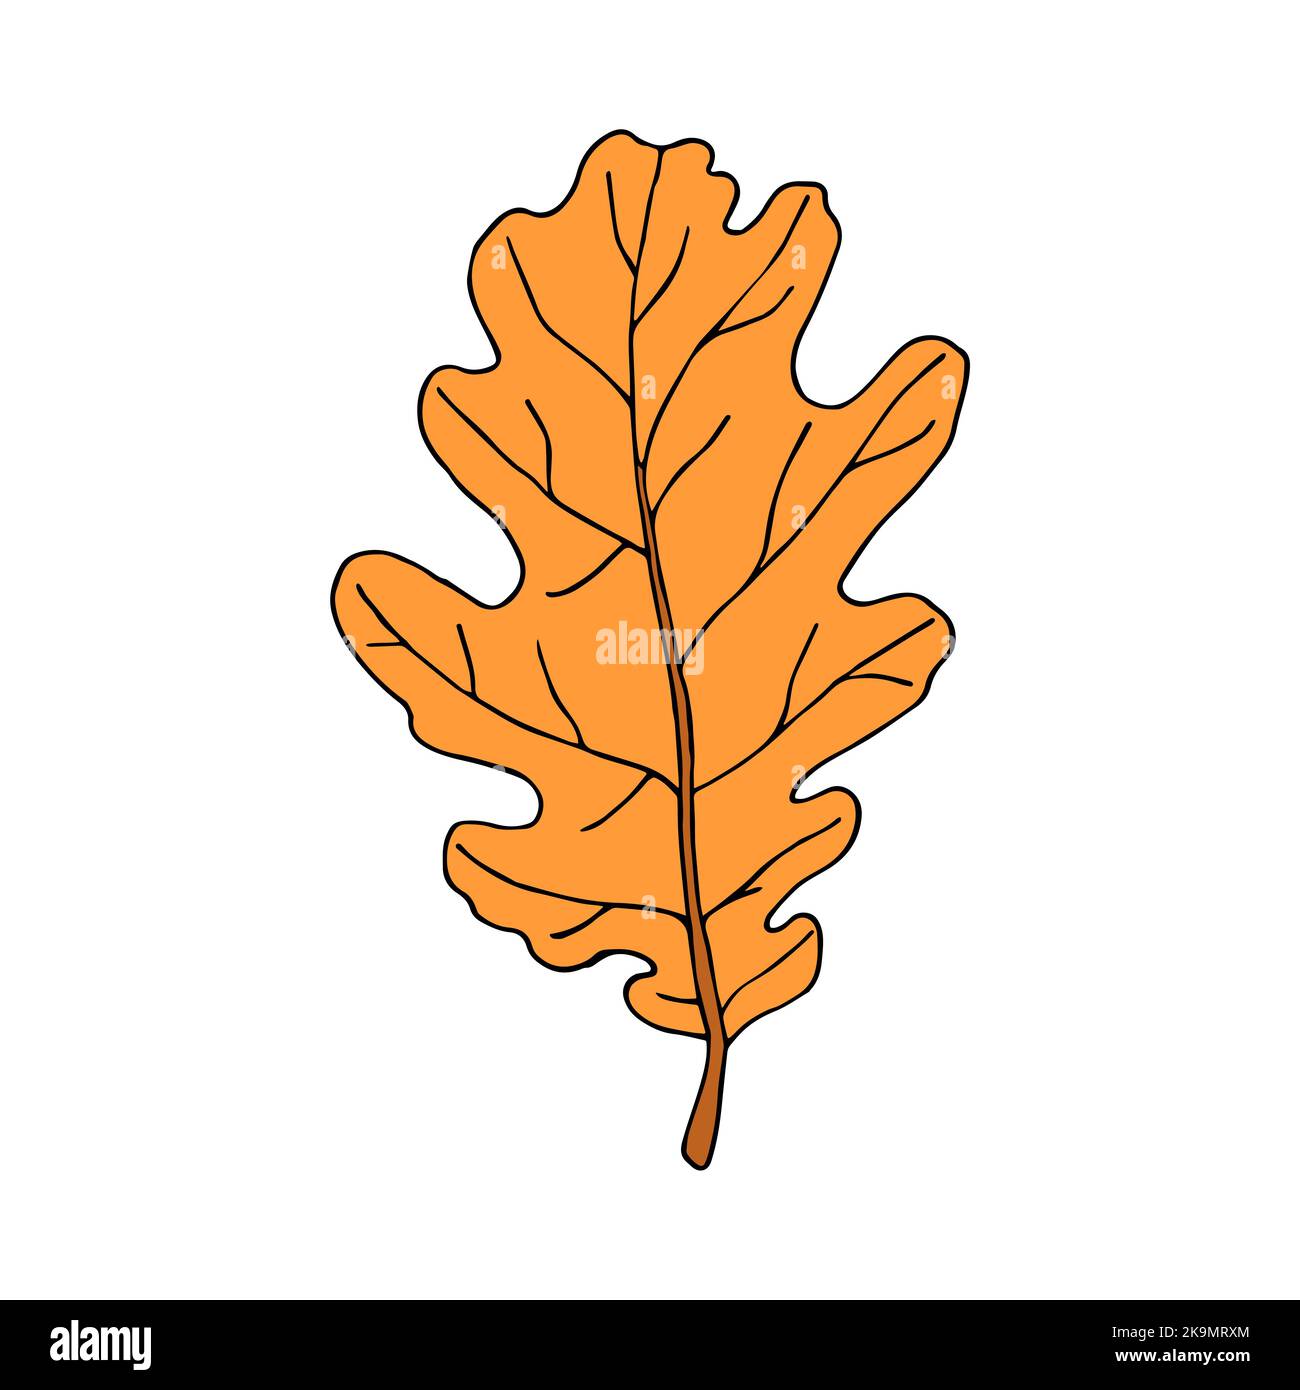 Fallen oak leaf in cartoon style. Vector illustration isolated on white background Stock Vector